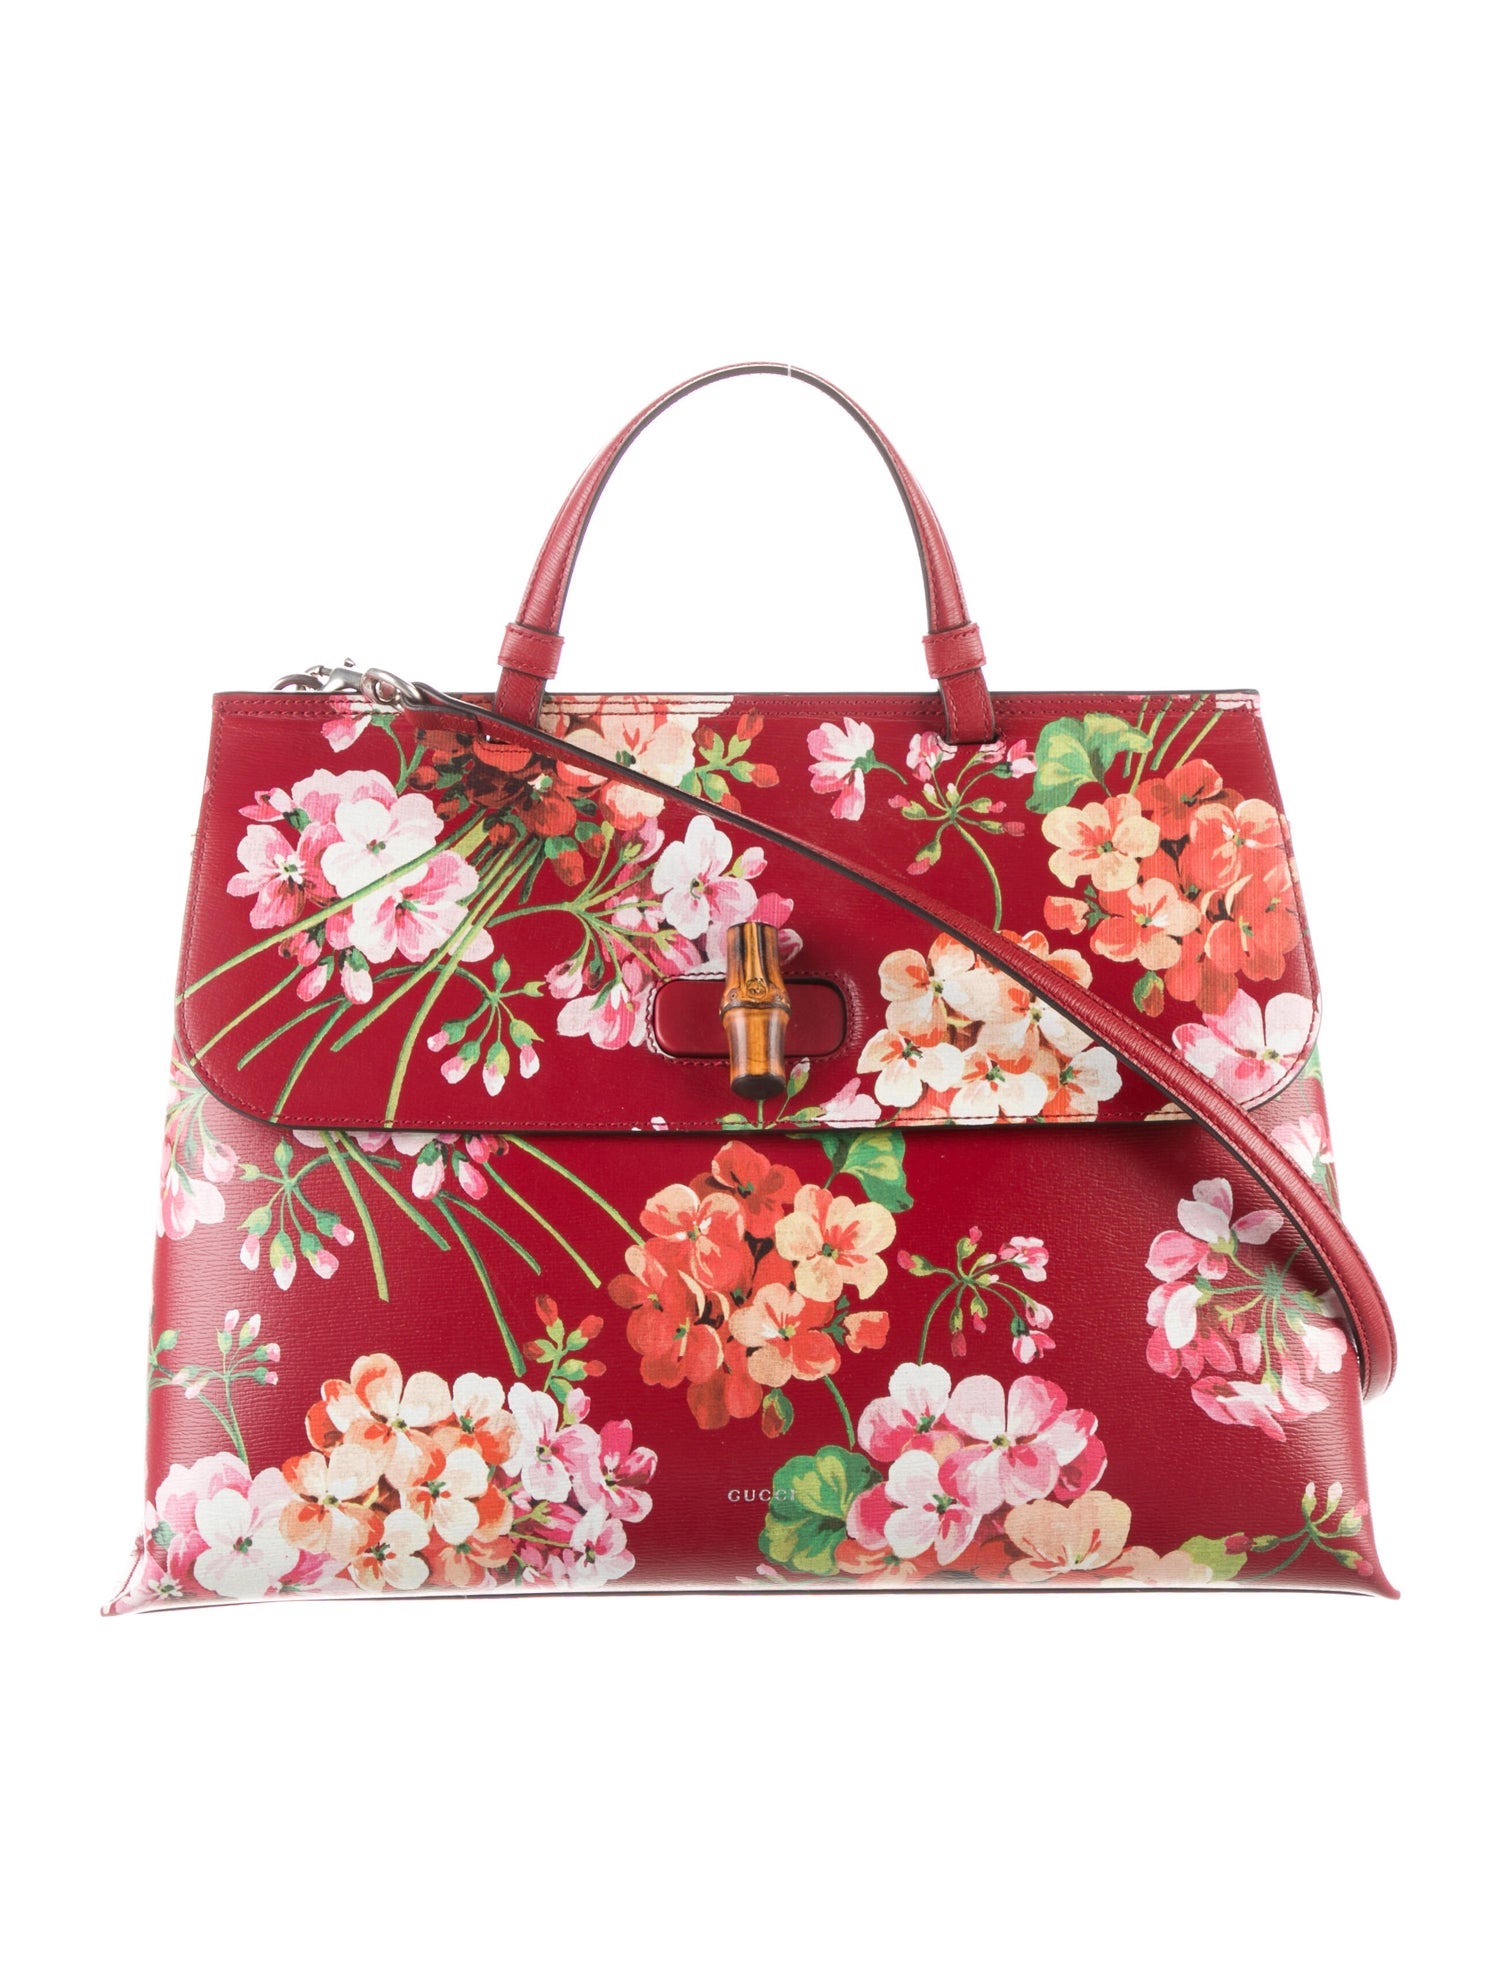 GUCCI Bamboo Blooms Daily Top Handle Bag